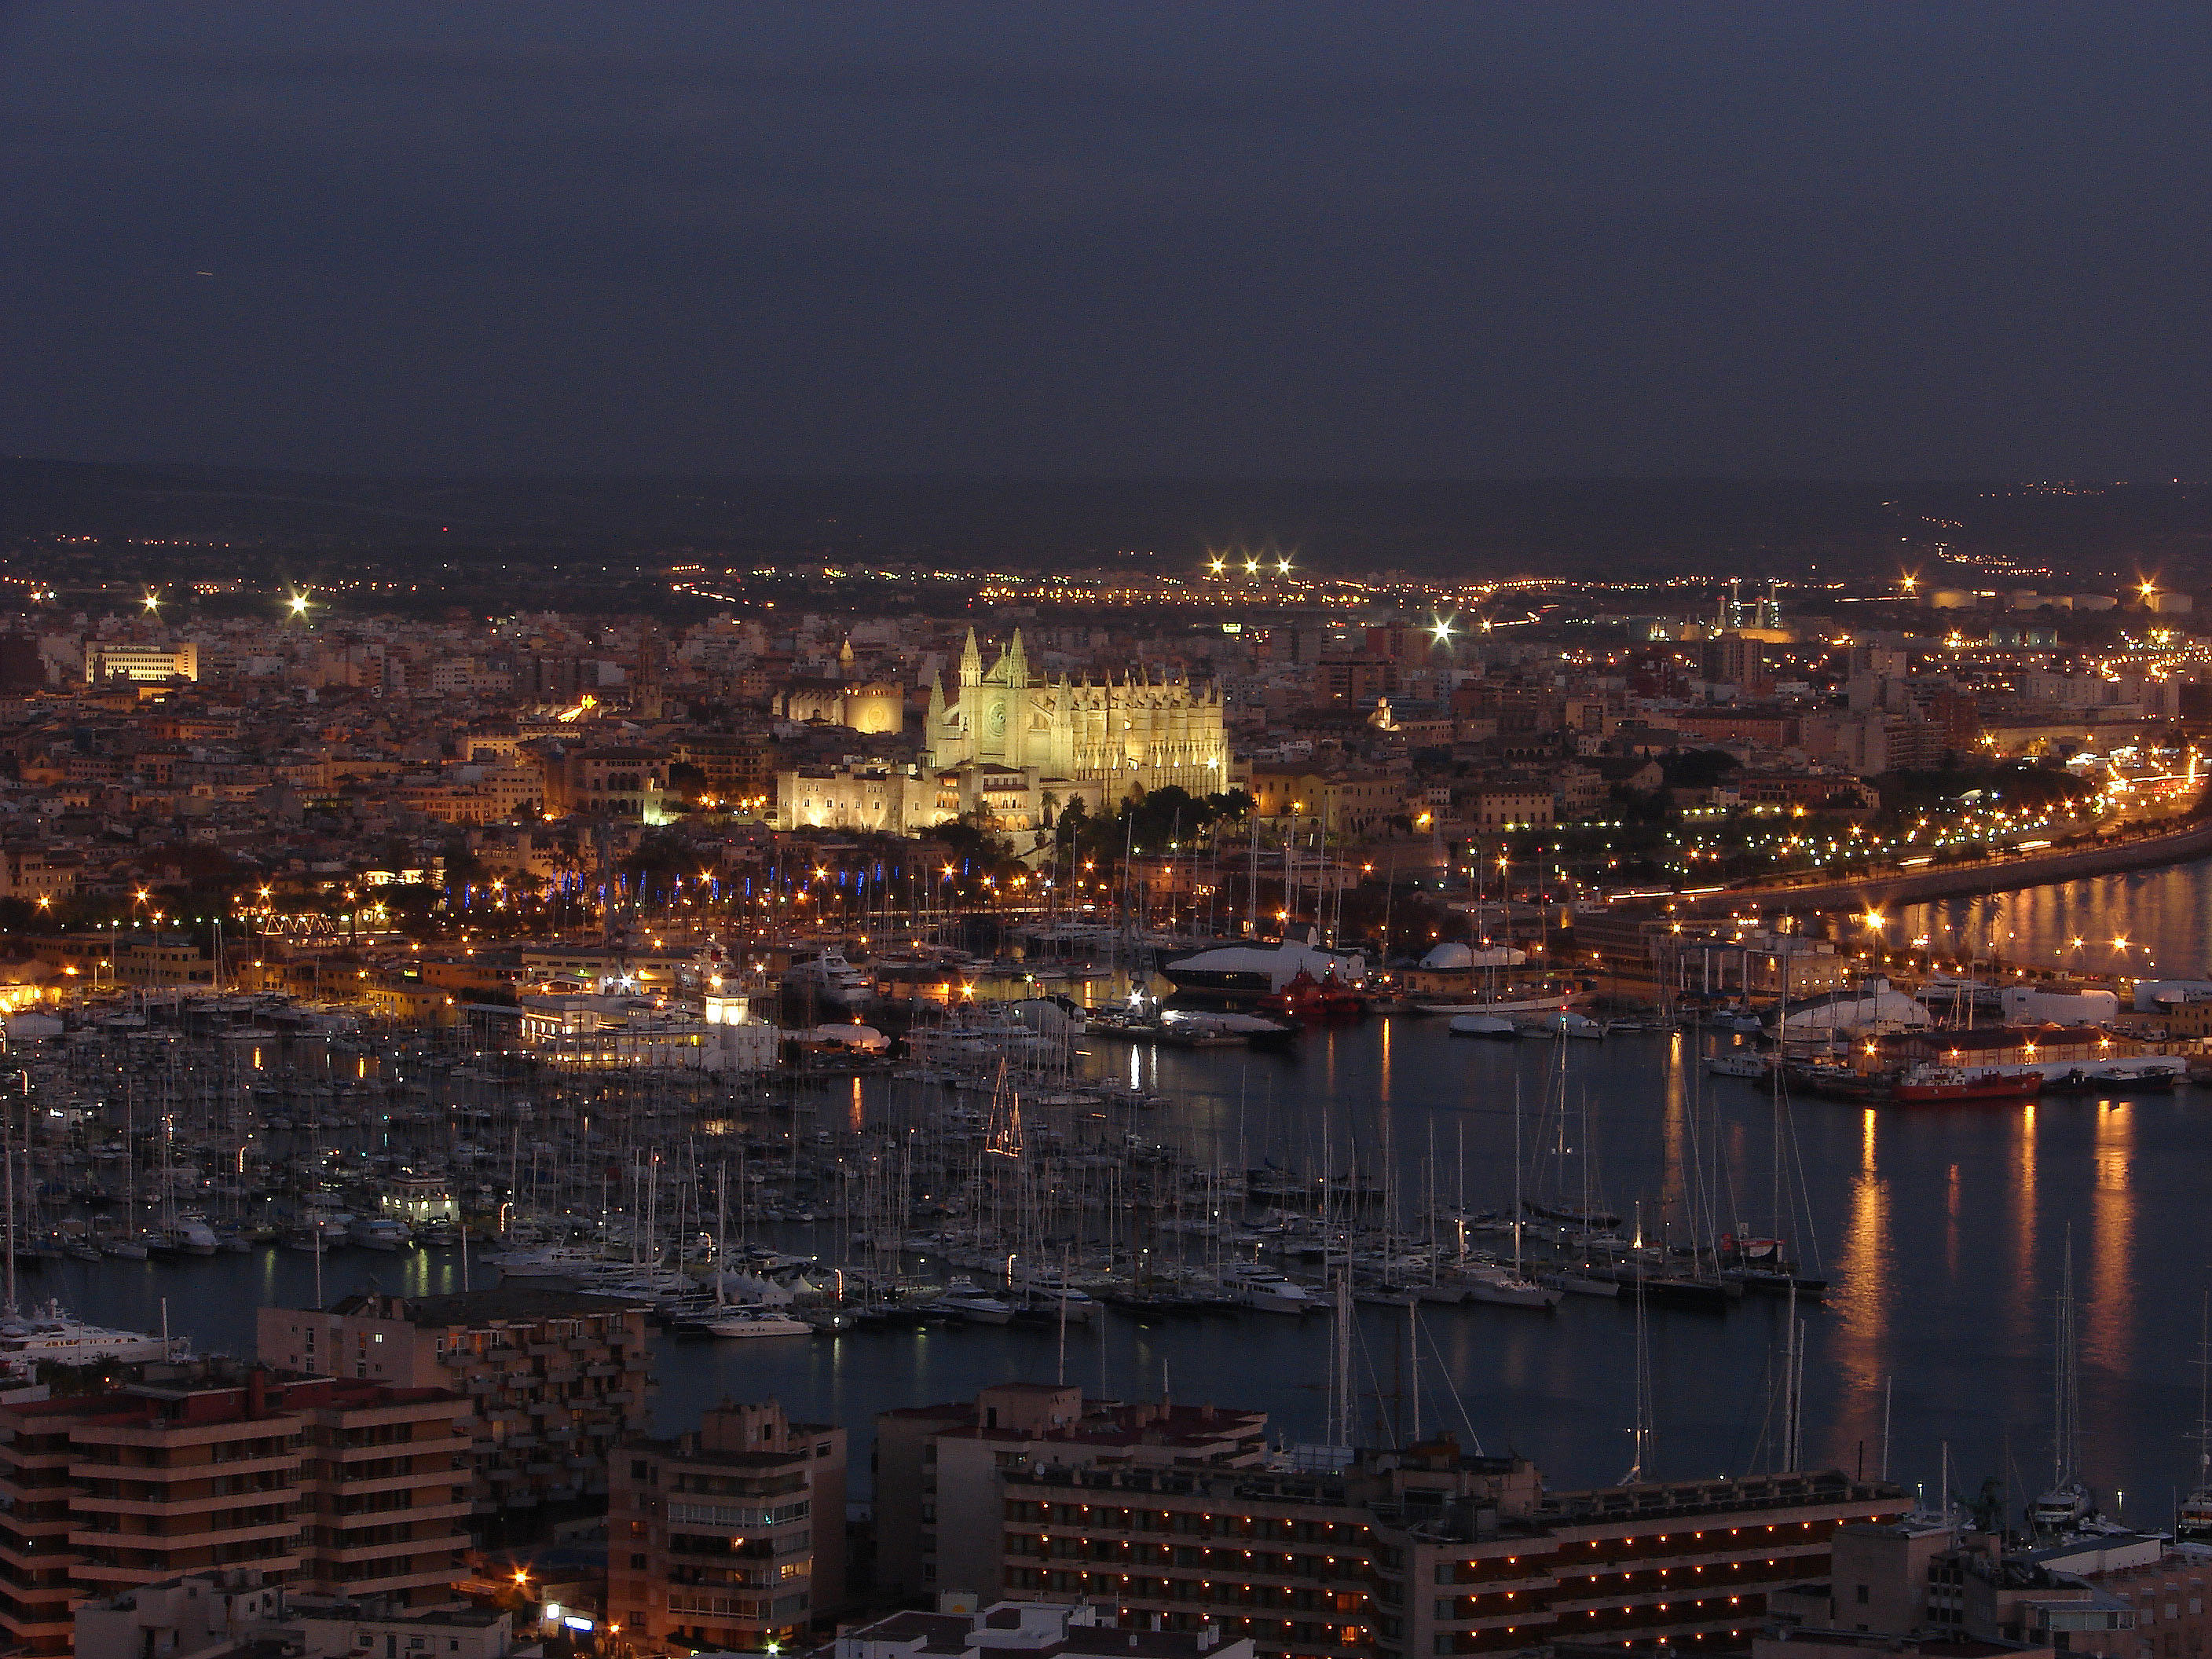 APB opens a tender for improving the energy efficiency of public lighting at the port of Palma